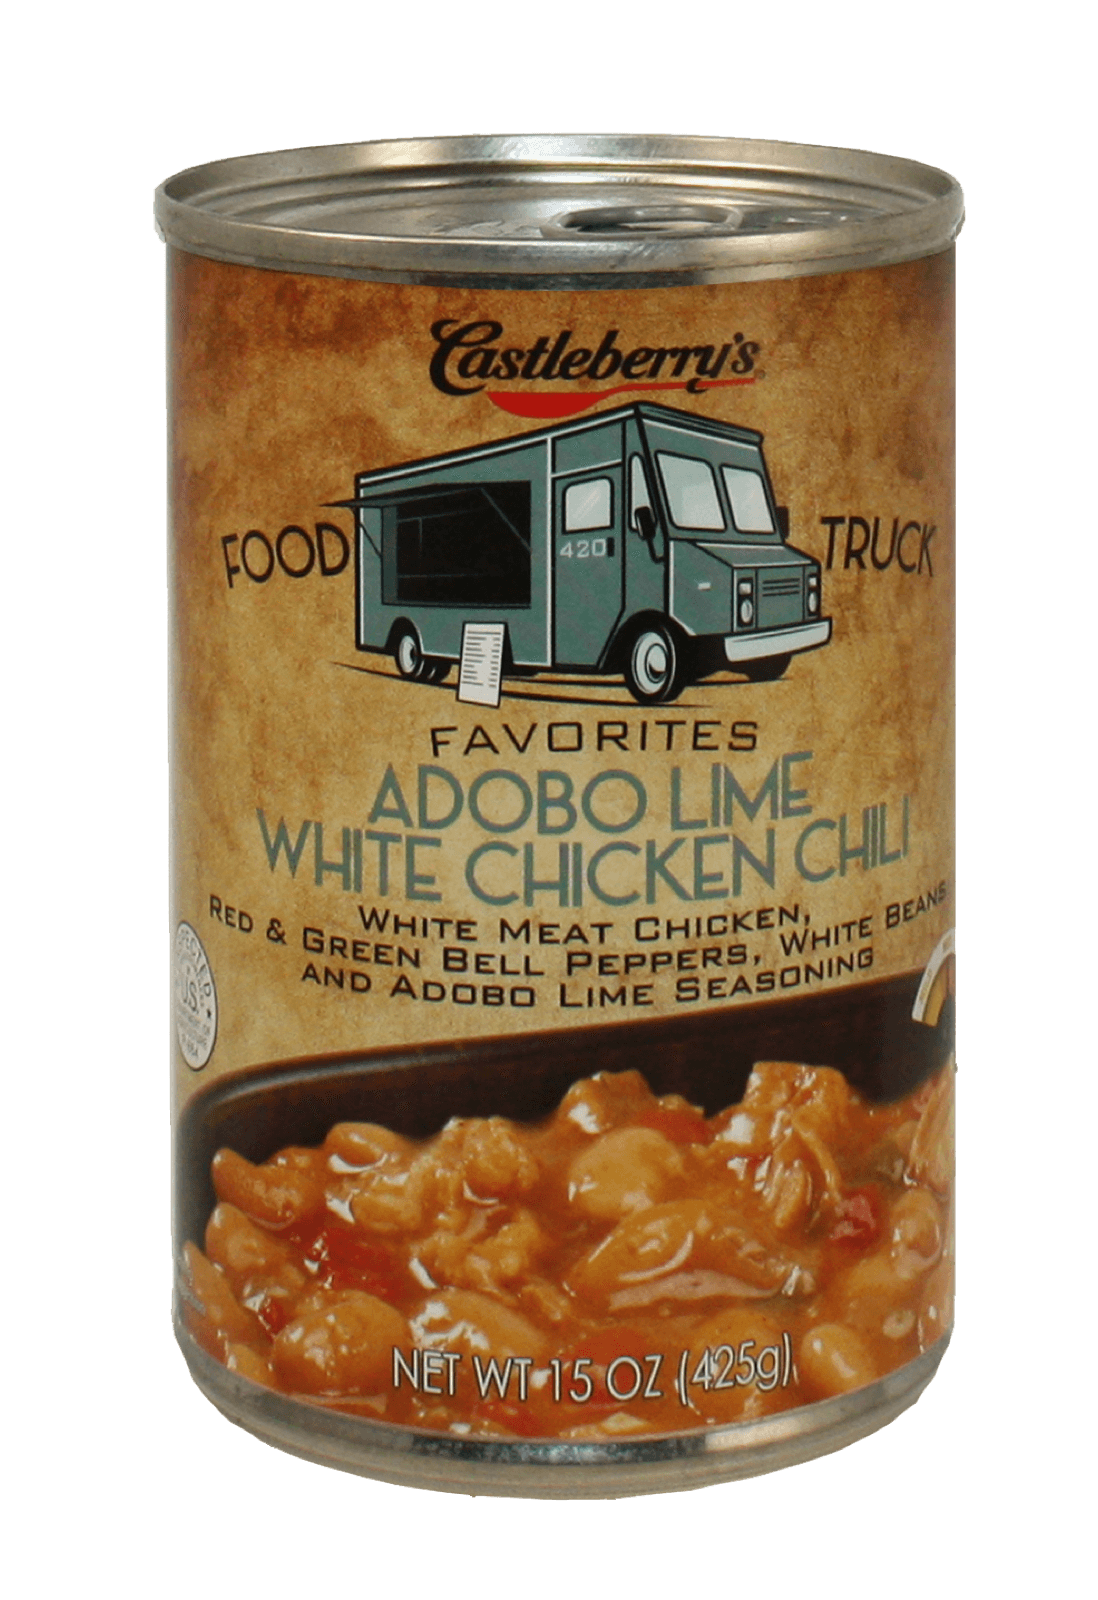 Castleberry's Food Truck Favorites Adobo Lime Chicken Chili 15oz 30300-07379-4 image (1)